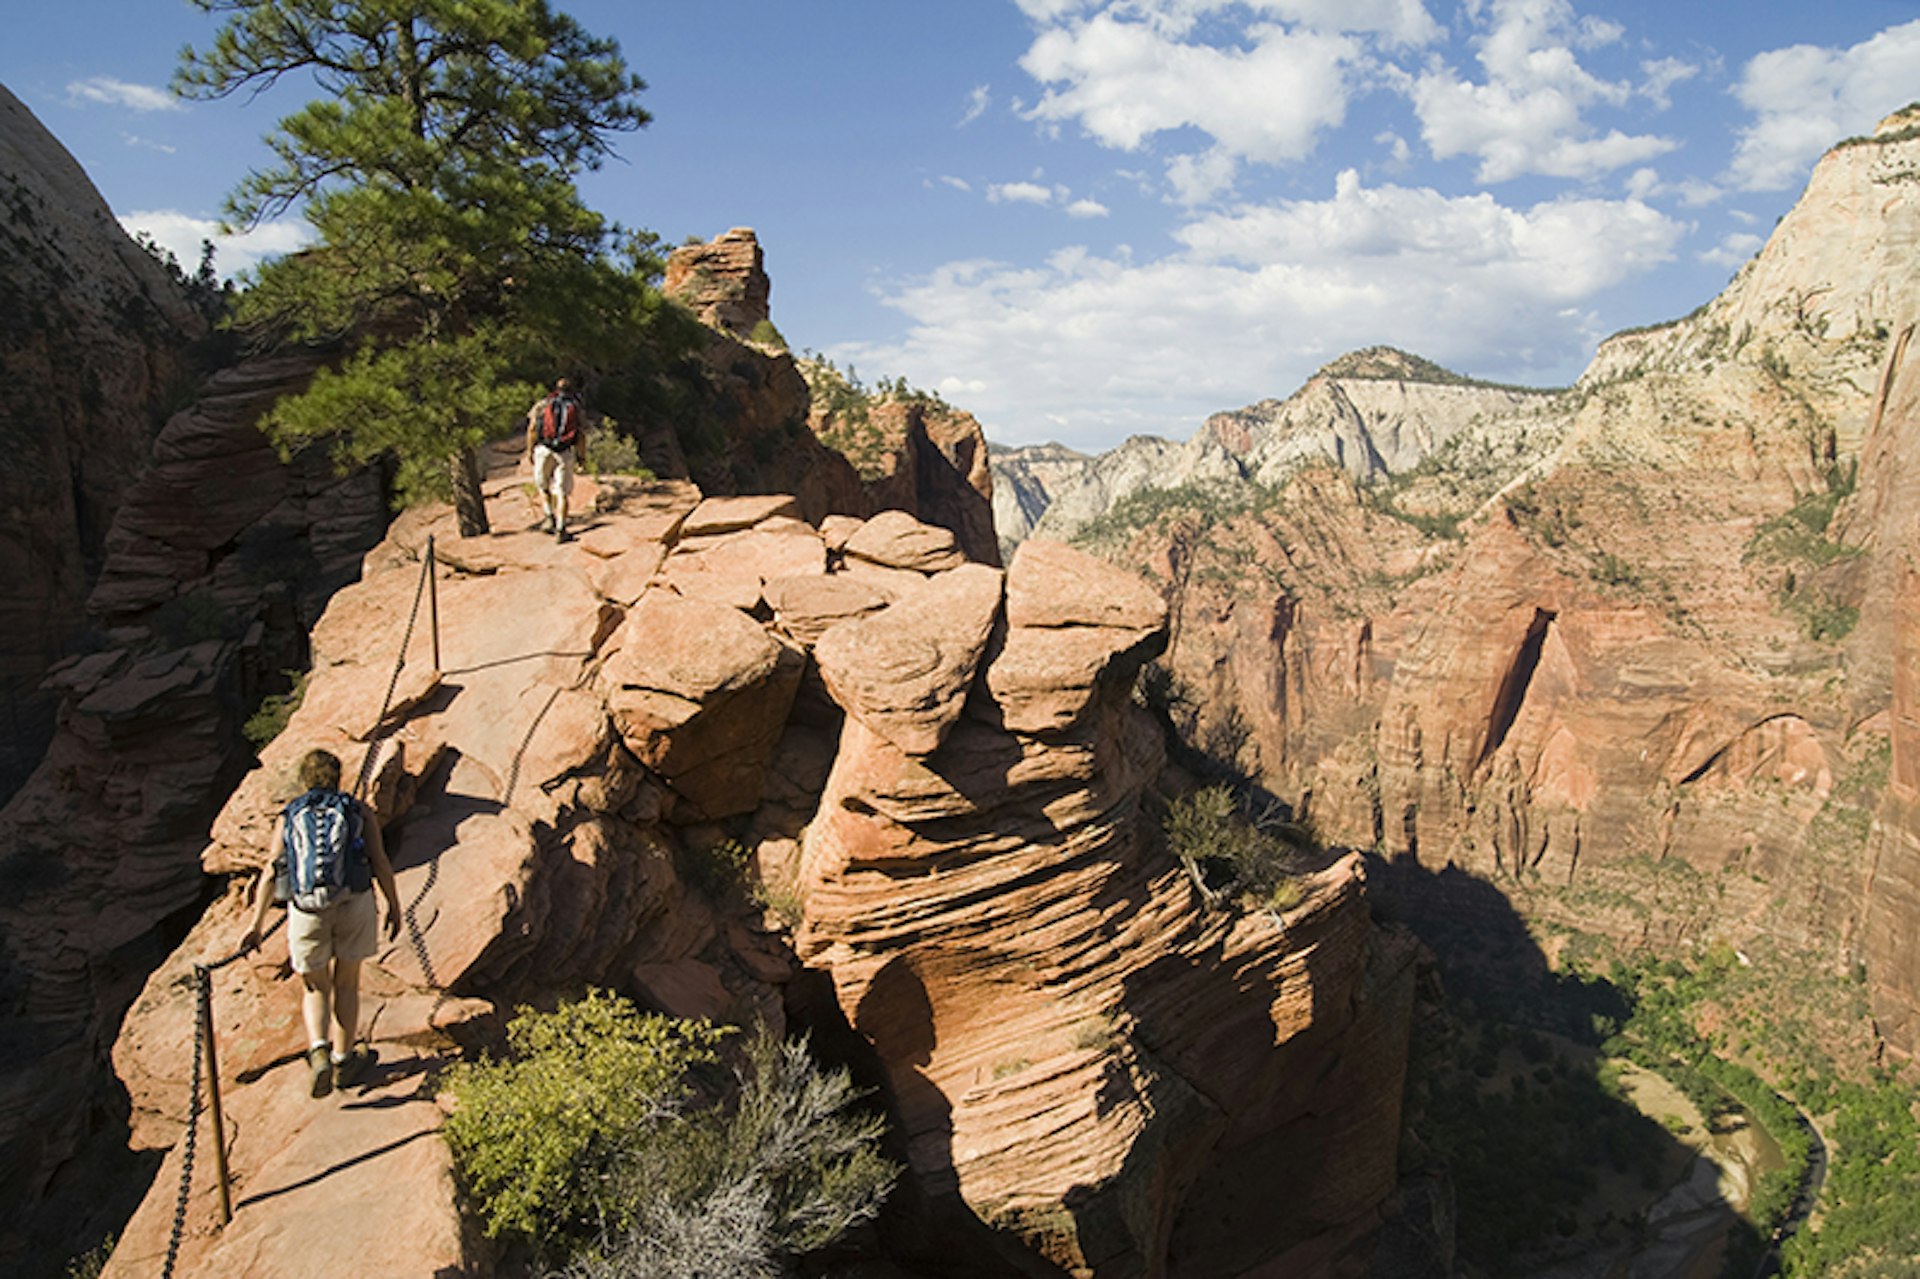 Angel's Landing Trail at Zion National Park. Photo by Ethan Welty / Getty Images.